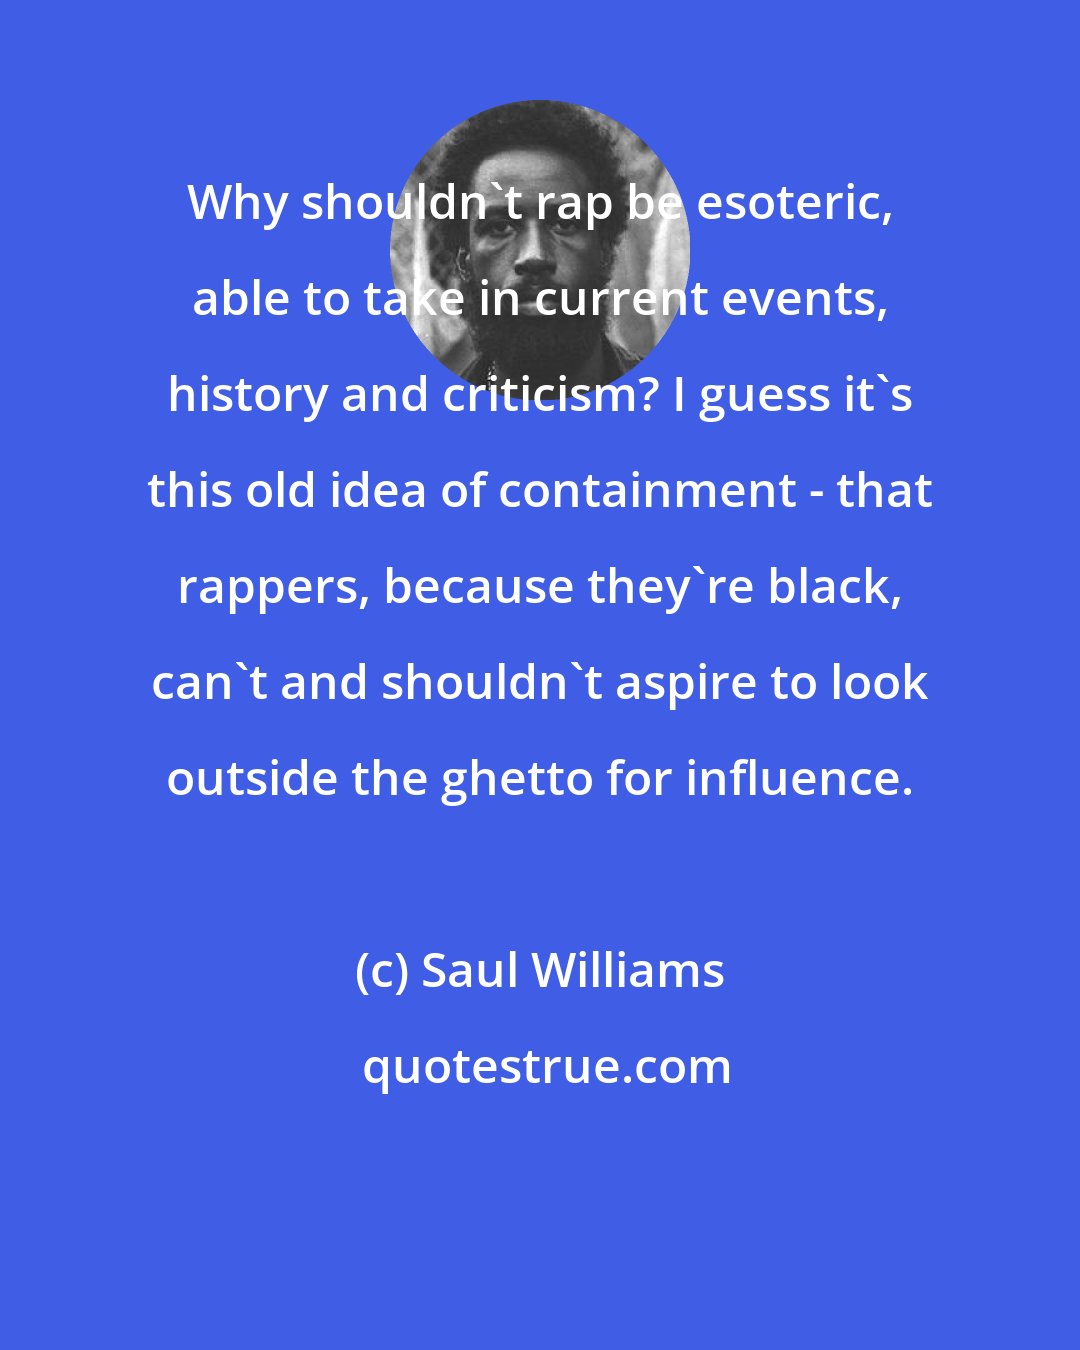 Saul Williams: Why shouldn't rap be esoteric, able to take in current events, history and criticism? I guess it's this old idea of containment - that rappers, because they're black, can't and shouldn't aspire to look outside the ghetto for influence.